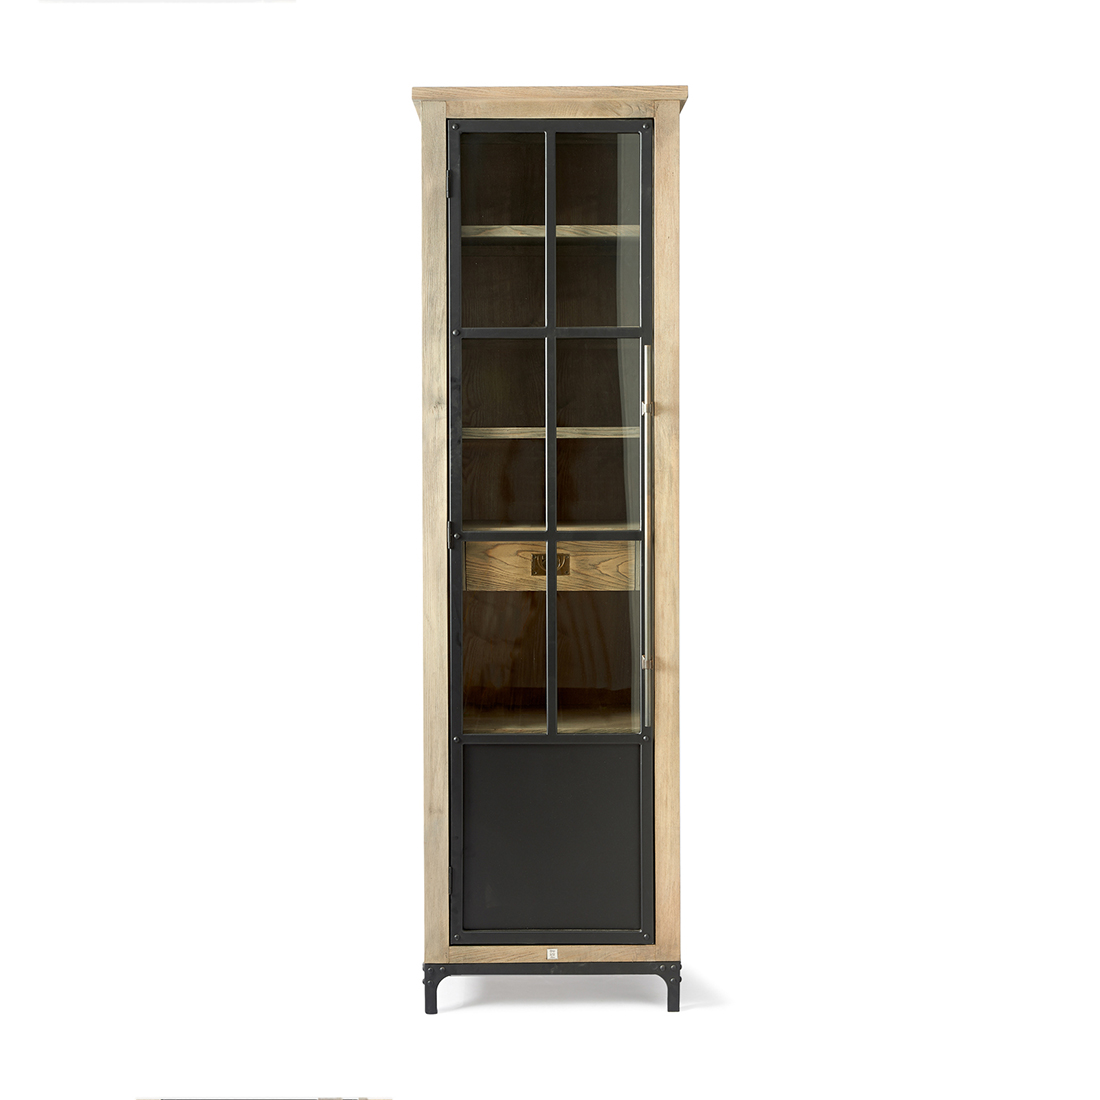 The Hoxton Cabinet Small Left